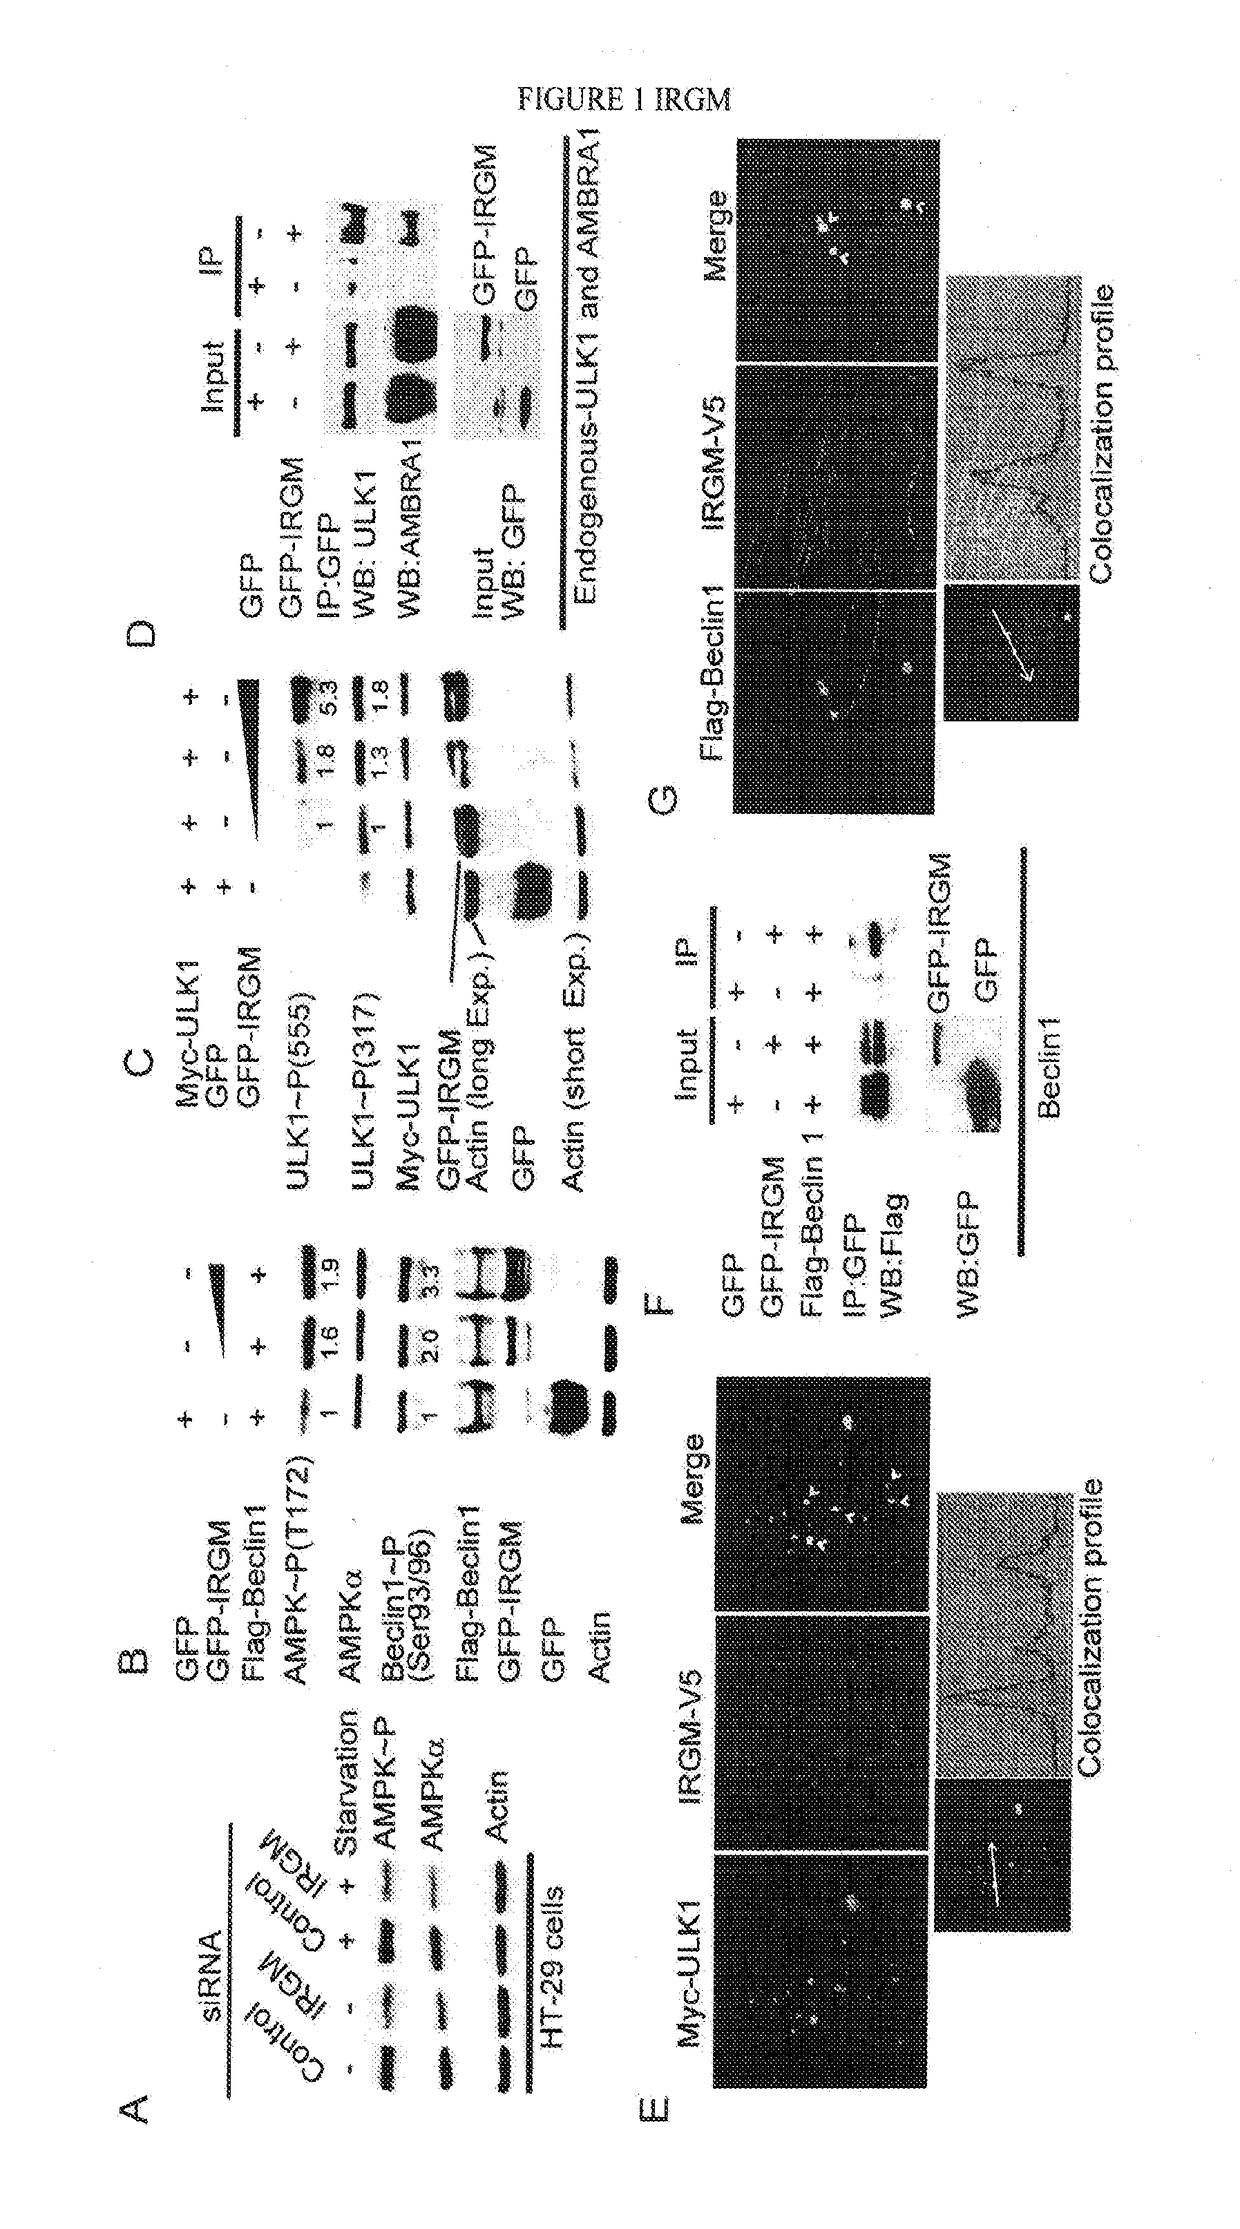 Irgm and precision autophagy controls for antimicrobial and inflammatory disease states and methods of detection of autophagy